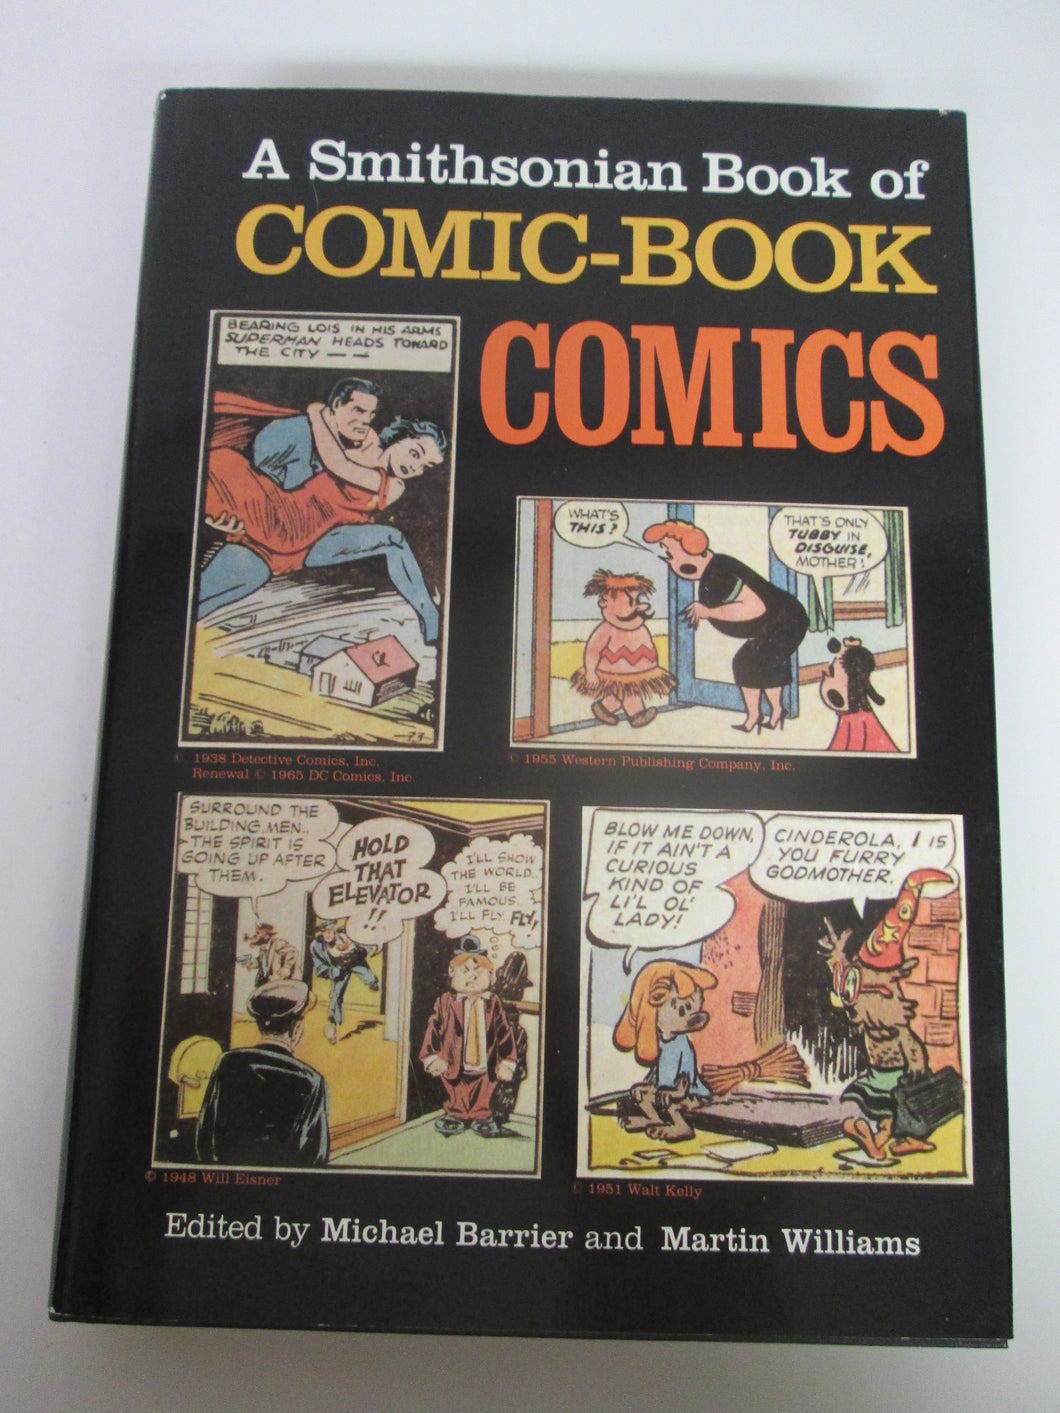 Smithsonian Book of Comic-Book Comics by Barrier & Williams 1981 HC